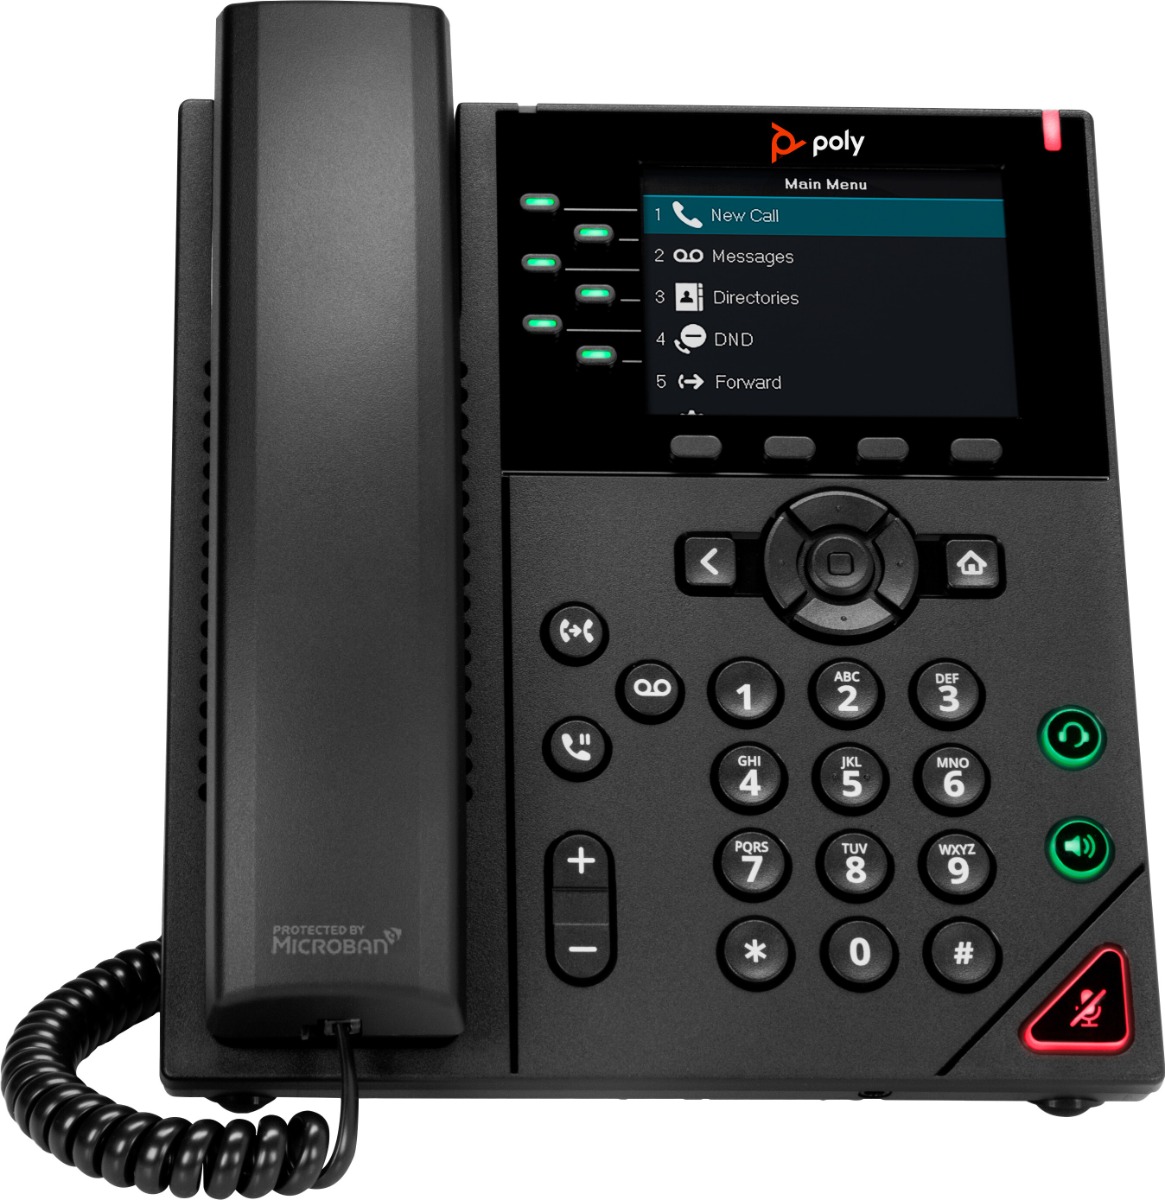 Can you provide the SKU for the product 'Polycom VVX 350 6-Line Mid-range Color IP Desktop Phone'?